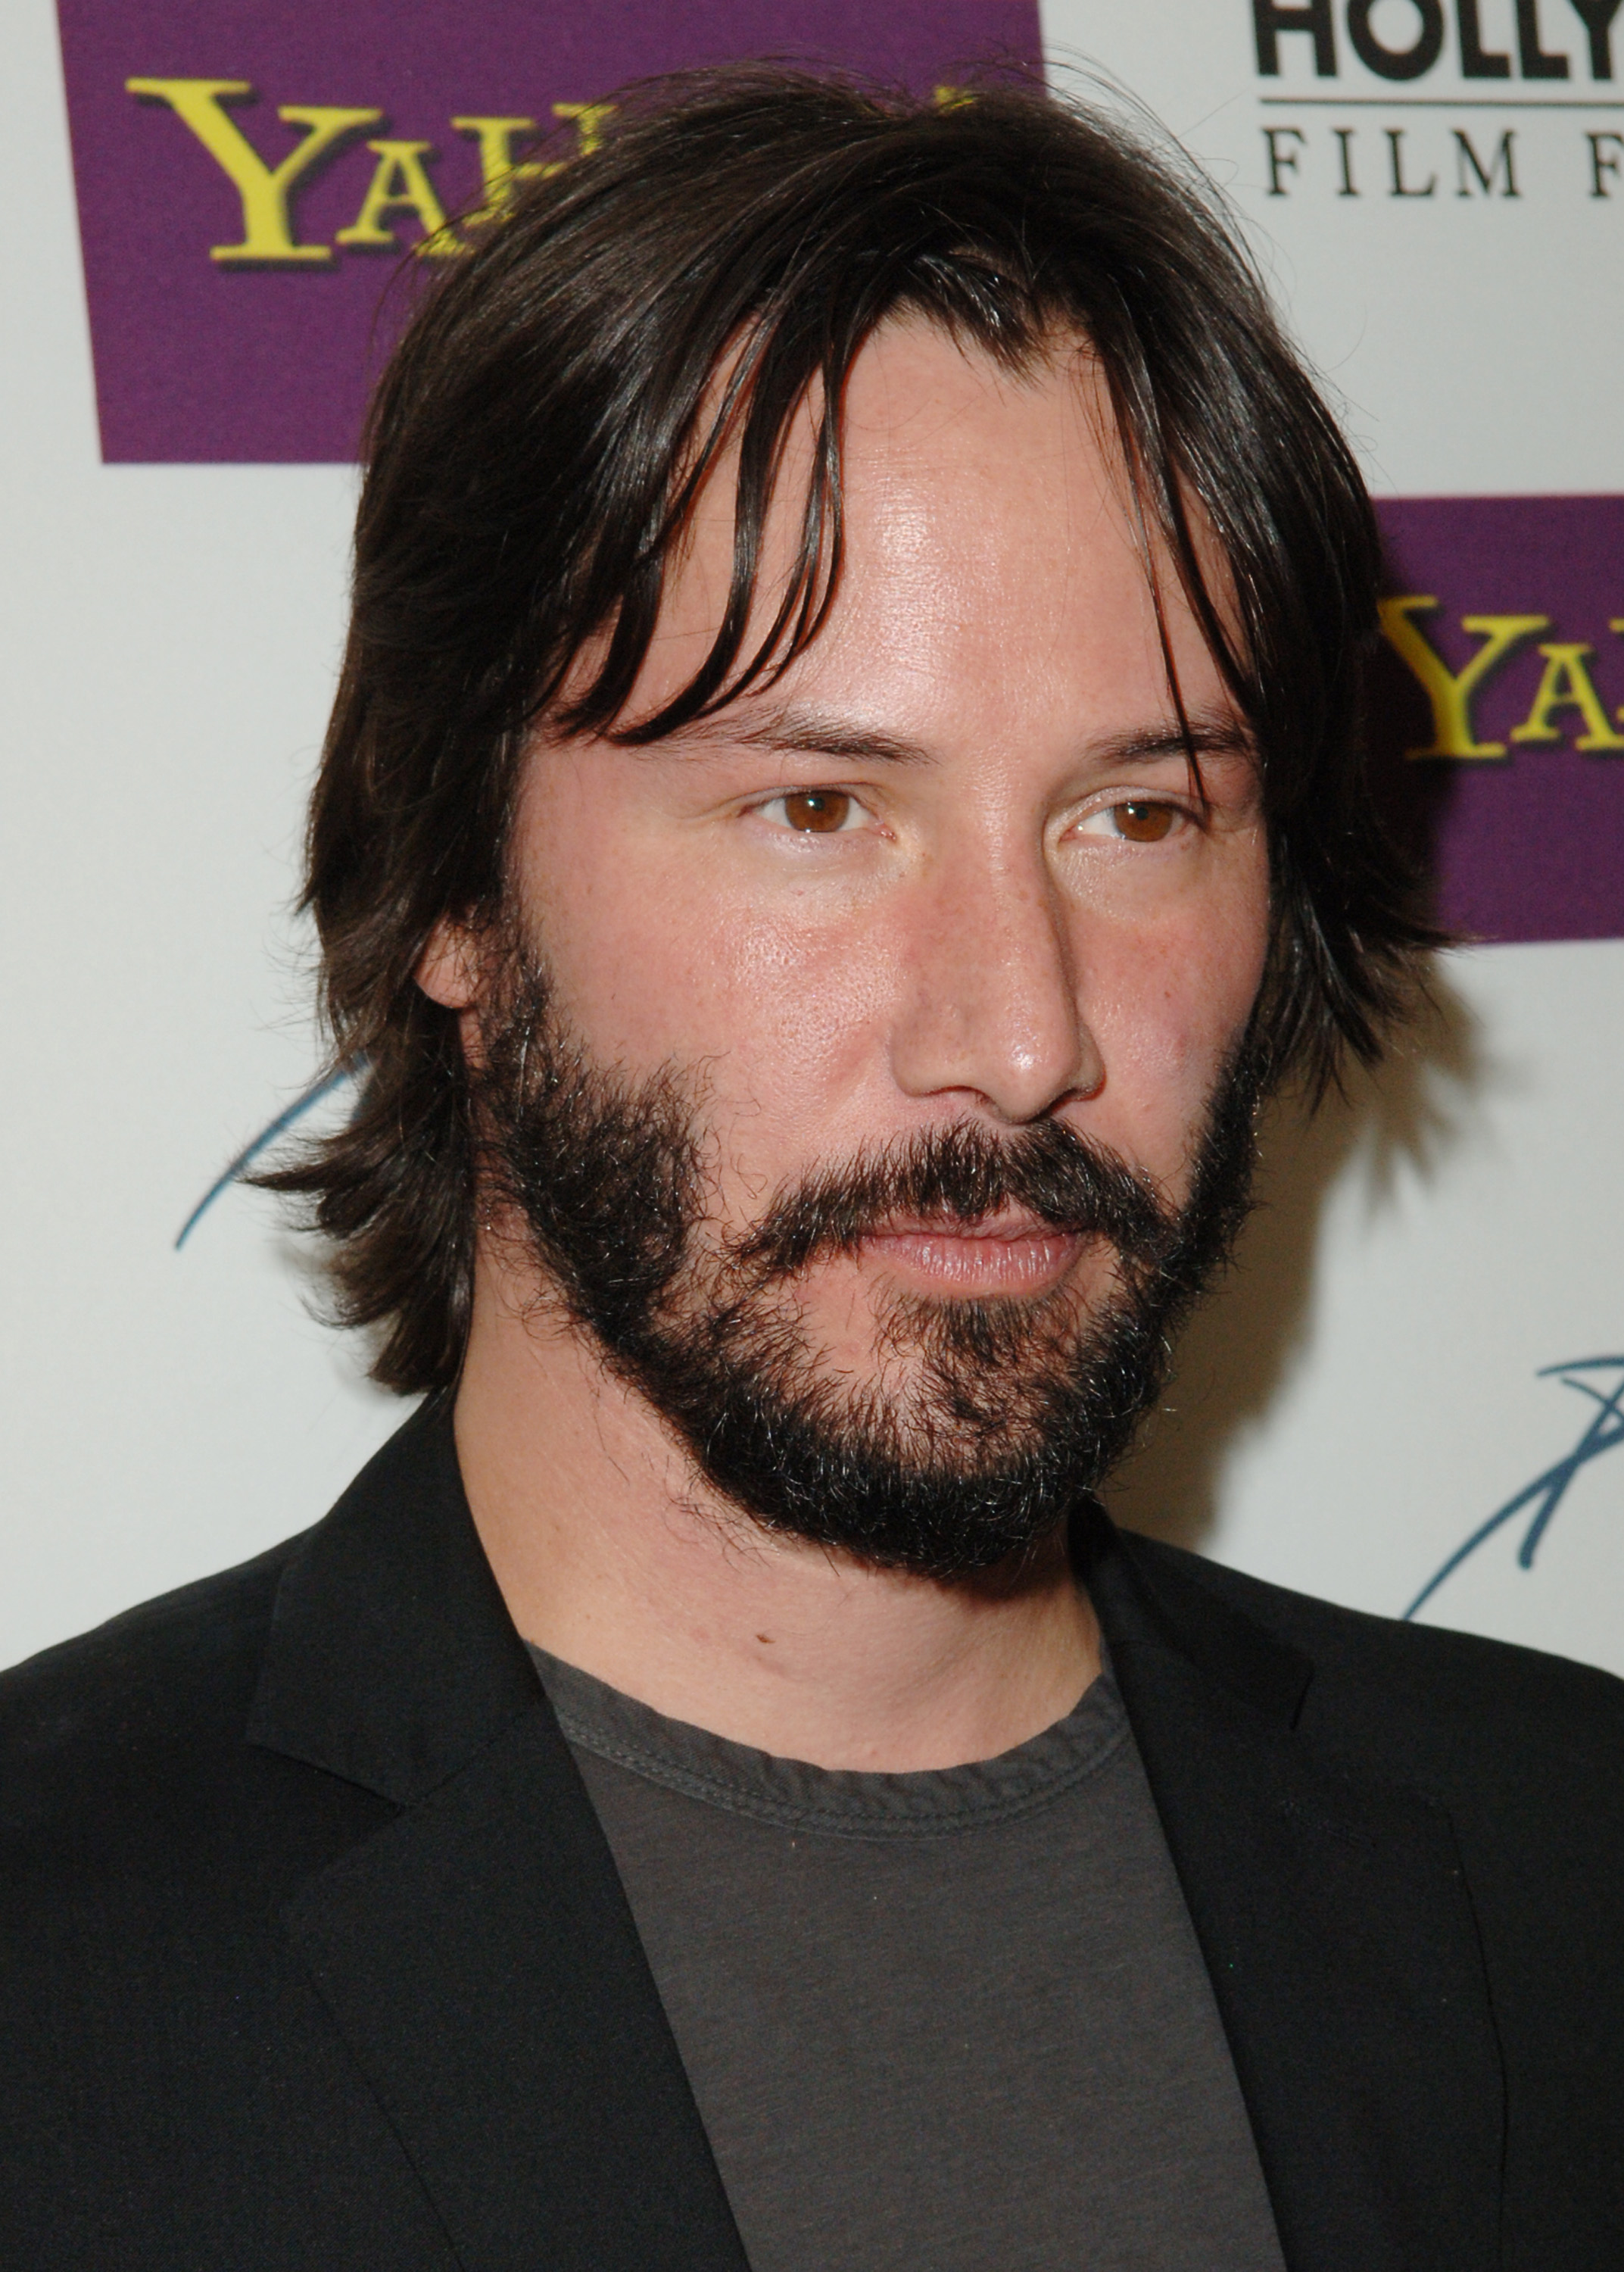 Keanu Reeves at the 9th Annual Hollywood Film Festival Awards in Beverly Hills, California in 2005 | Source: Getty Images